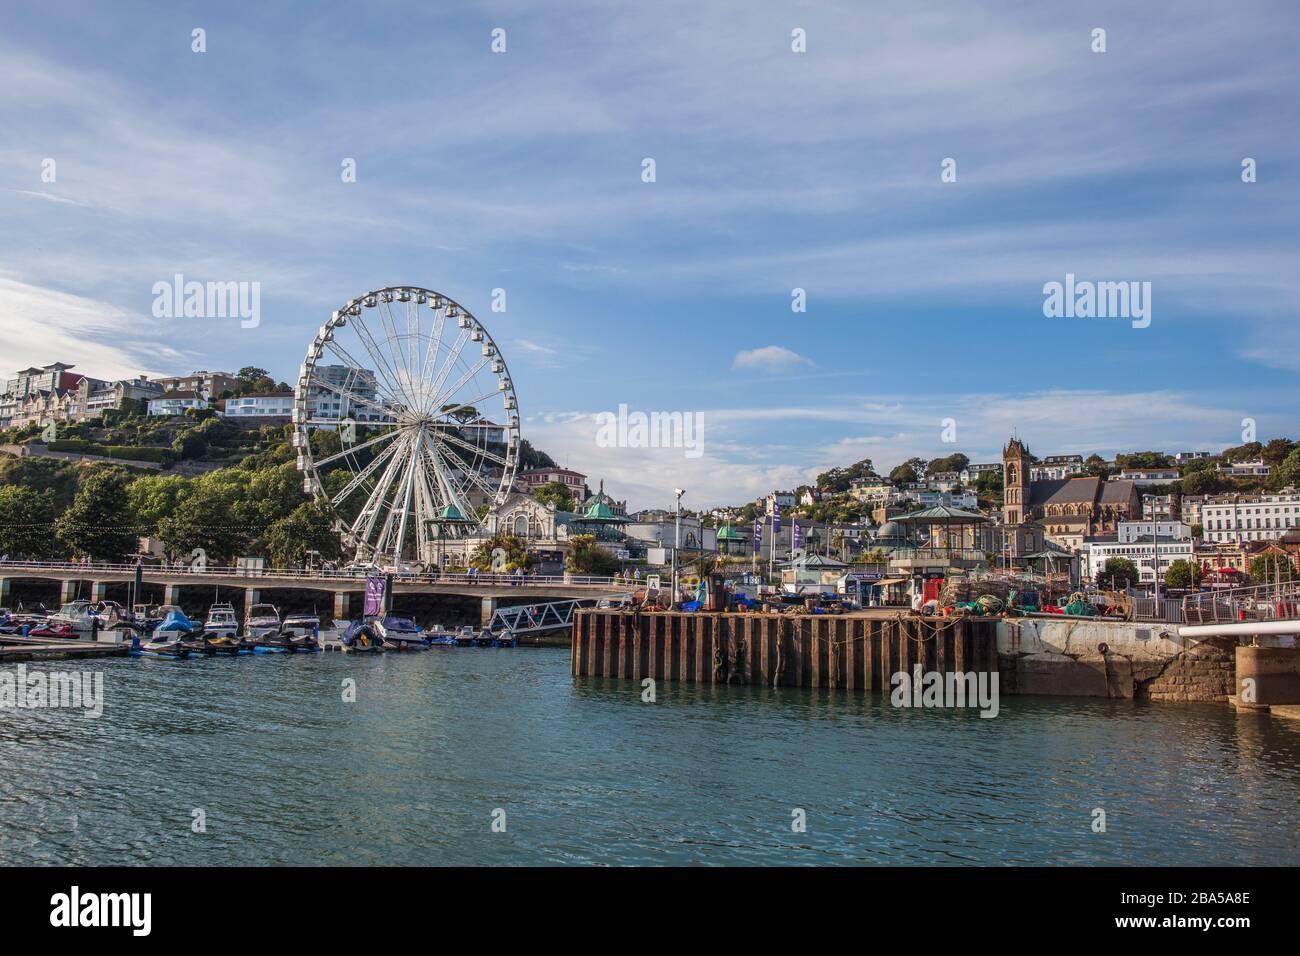 Ferris wheel on a harbour. Summer, spring. Scenes with bridge or pier with water, sea, beach, harbour. Boats, townscape or seascape Stock Photo